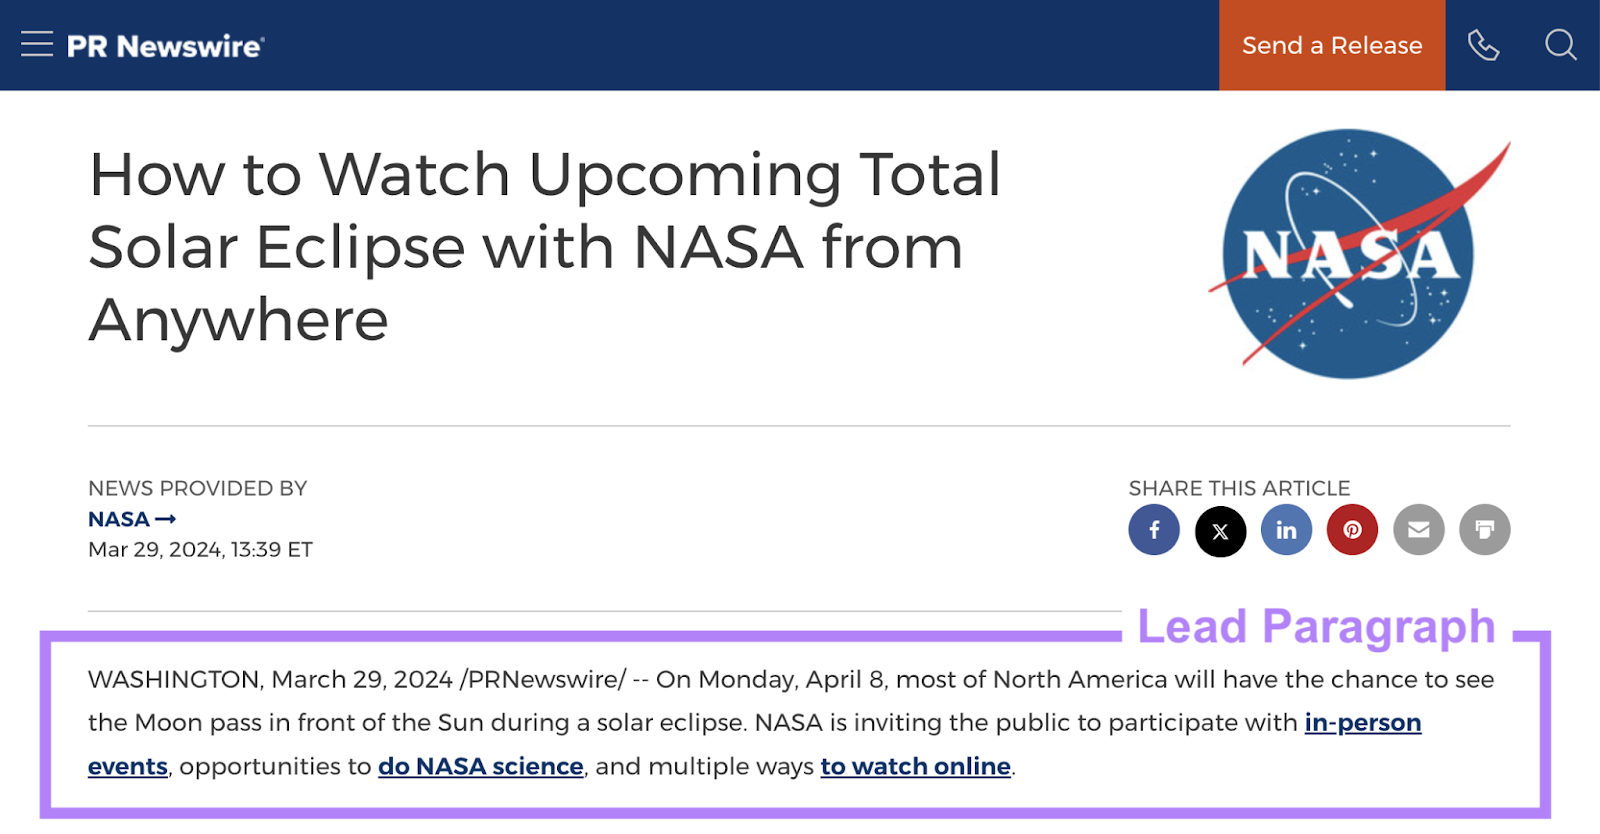 Lead paragraph says "on monday, april 8, most of north america will have the chance to see the moon pass in front of the sun during a solar eclipse. NASA is inviting the public to participate with in person event [...] multiple ways to watch online."